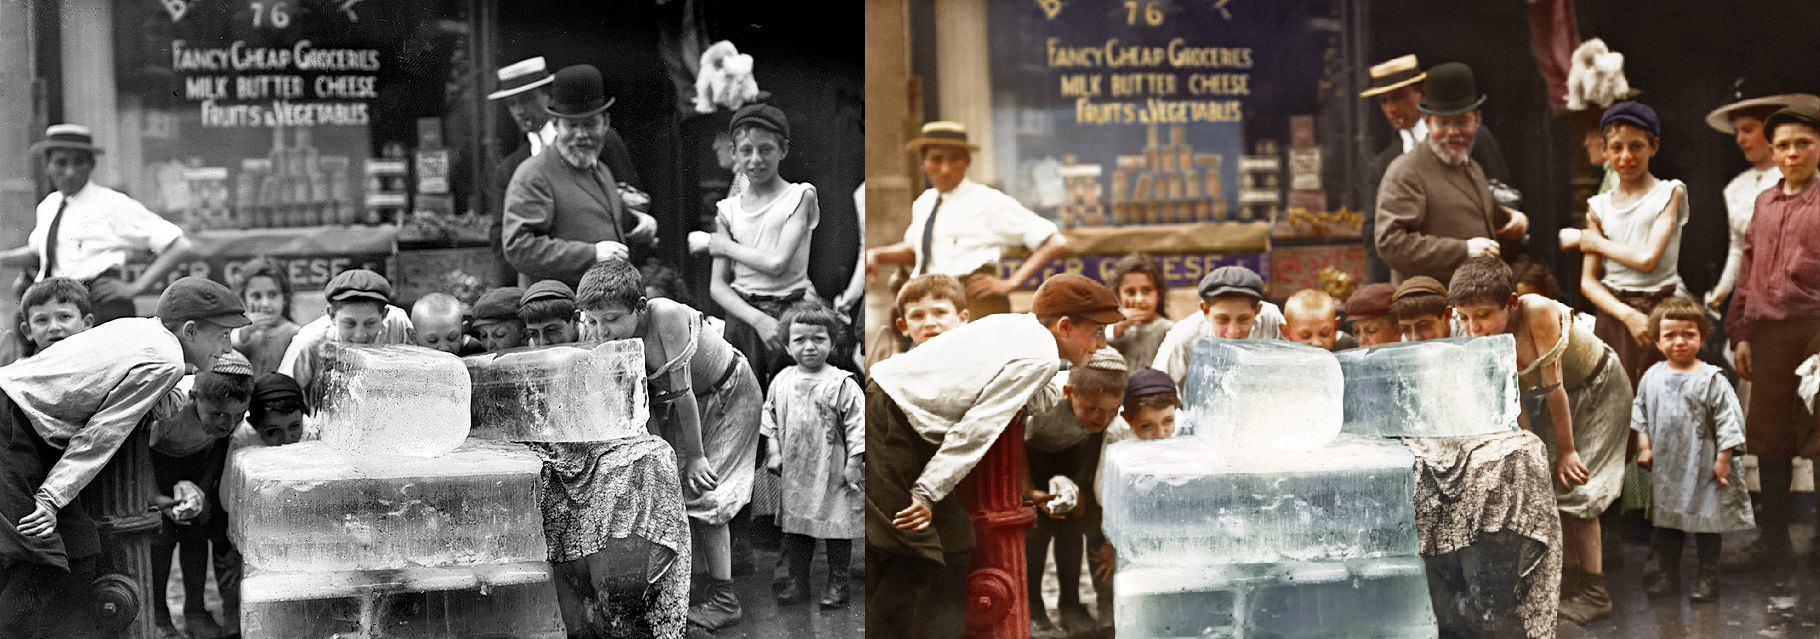 Licking ice on a hot day in NYC, US, in 1912.